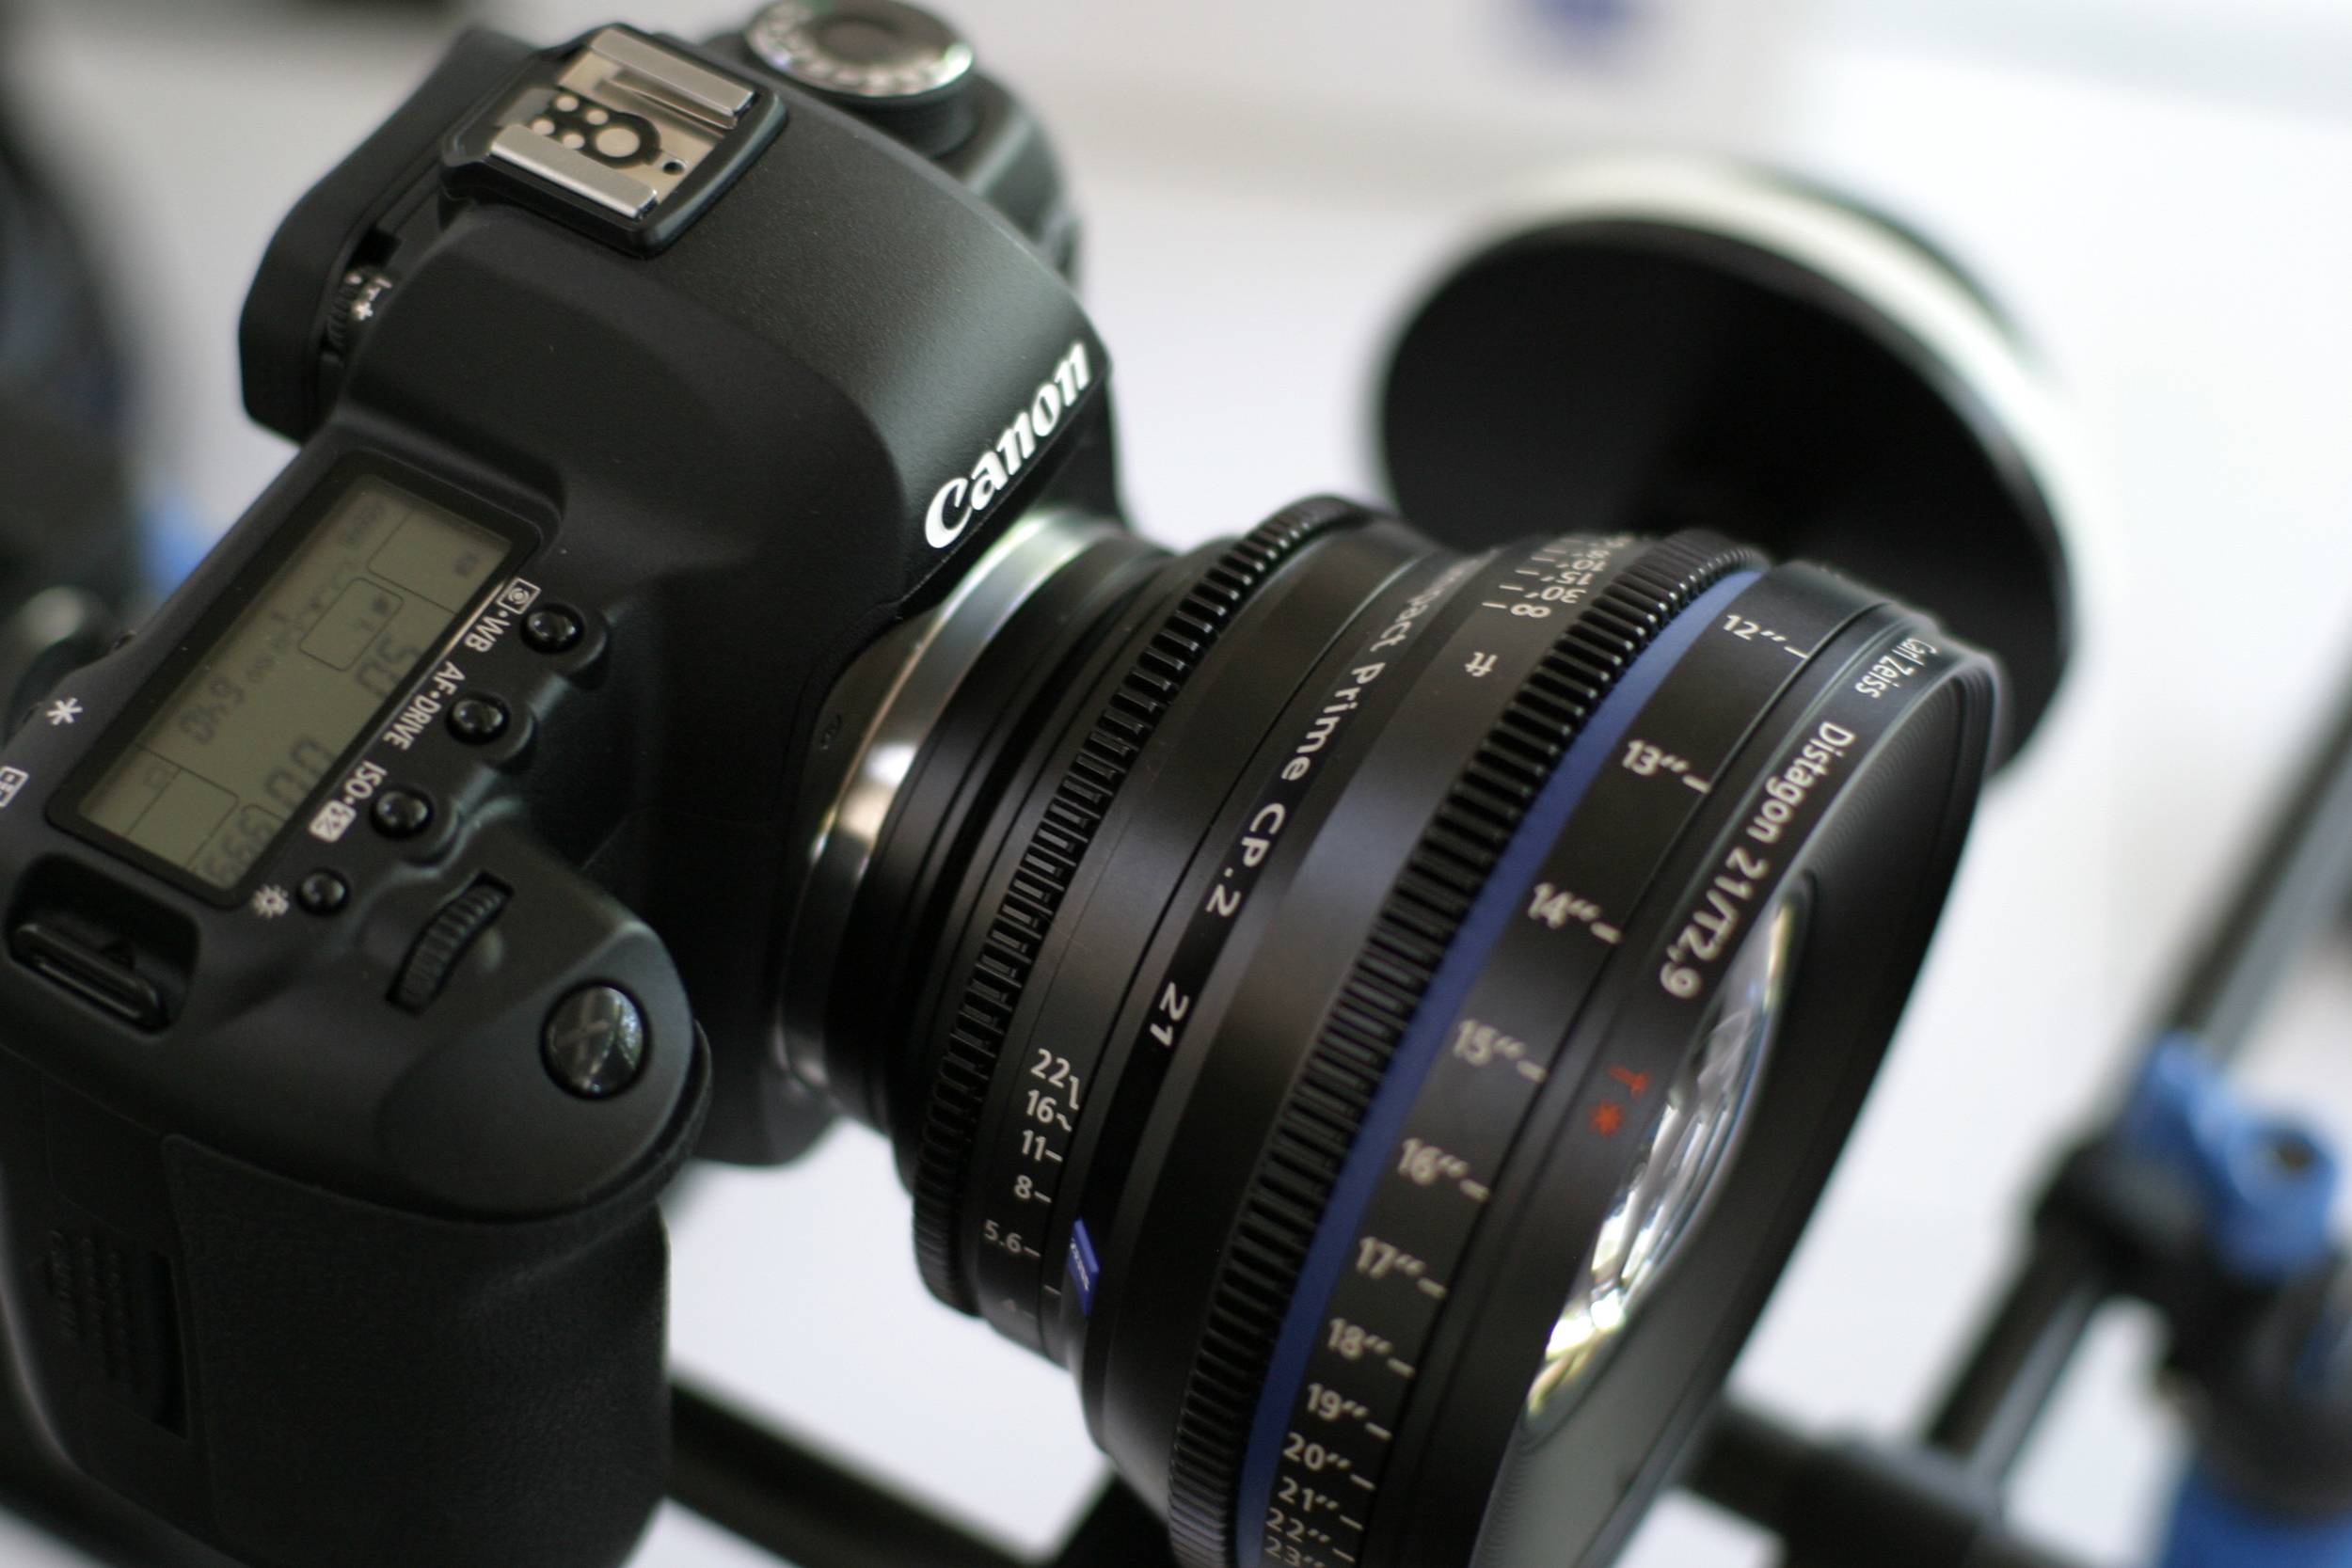 Zeiss sent Compact Prime lenses for evaluation